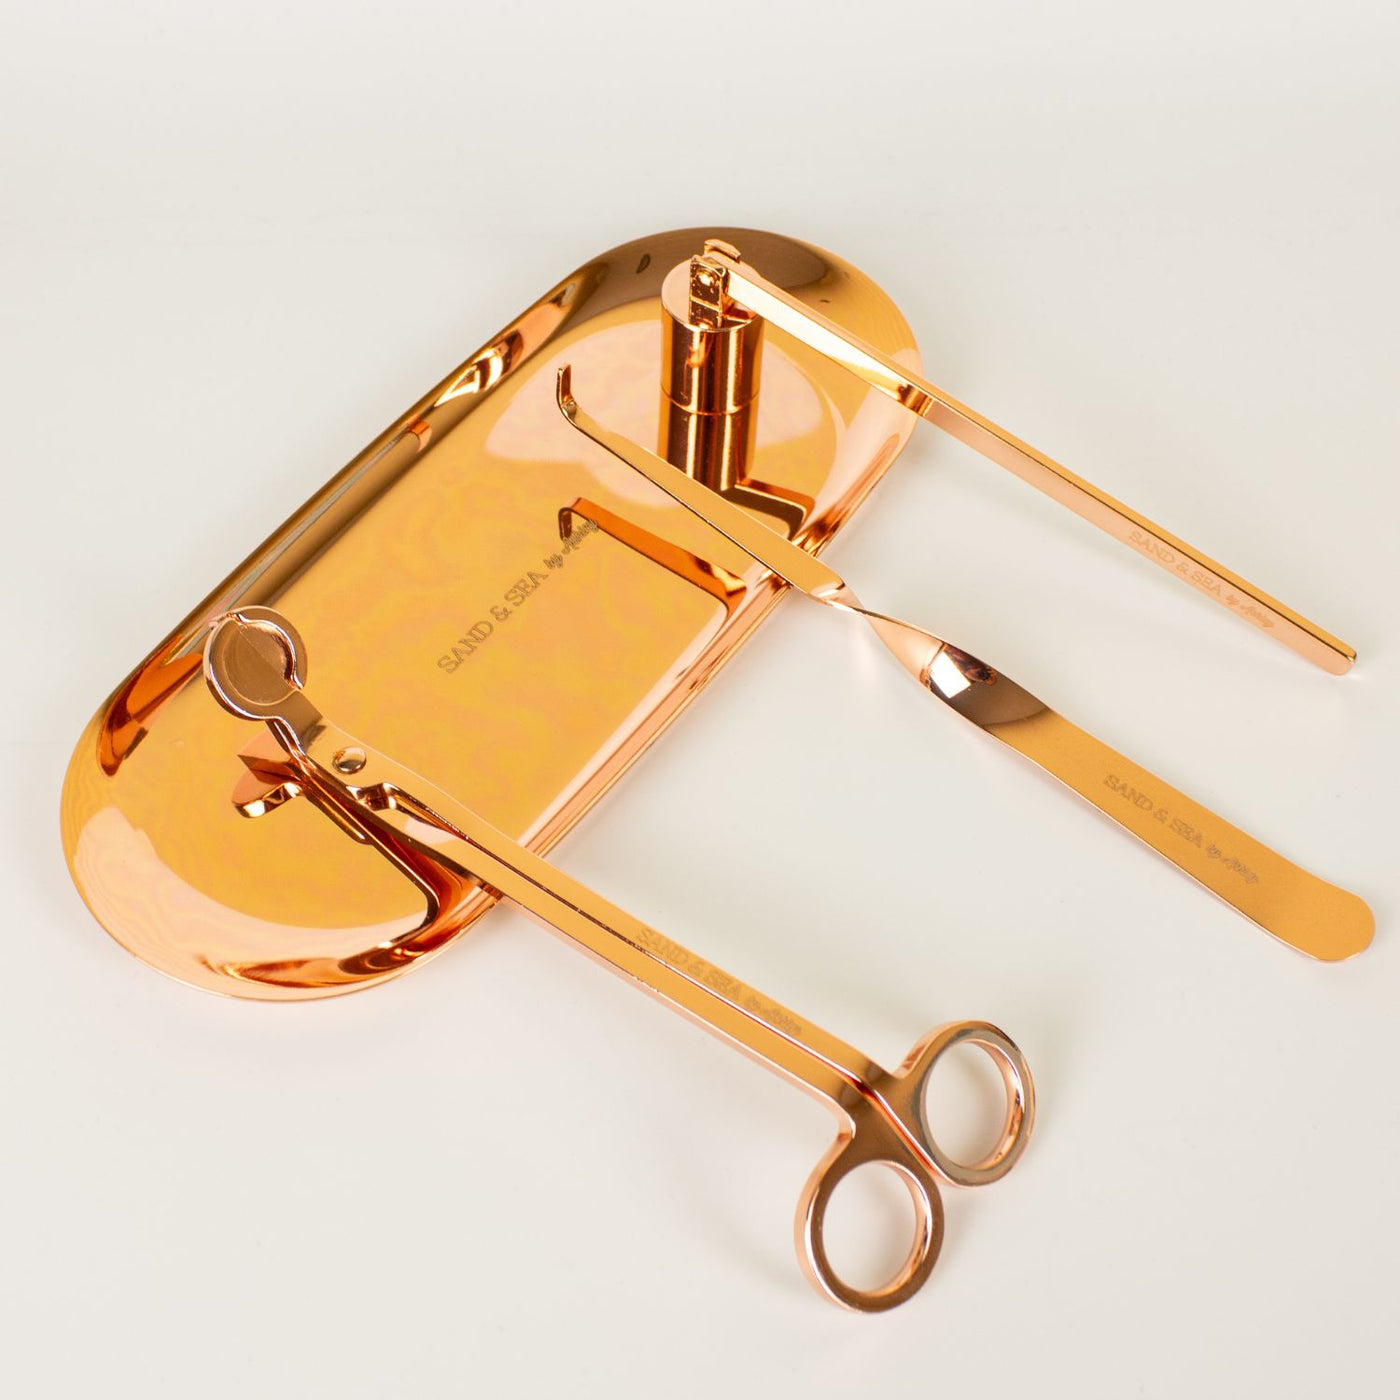 Candle Care Kits with Candle Snuffer, Wick Trimmer, Wick Dipper and Plate - 4 Pieces - Rose Gold